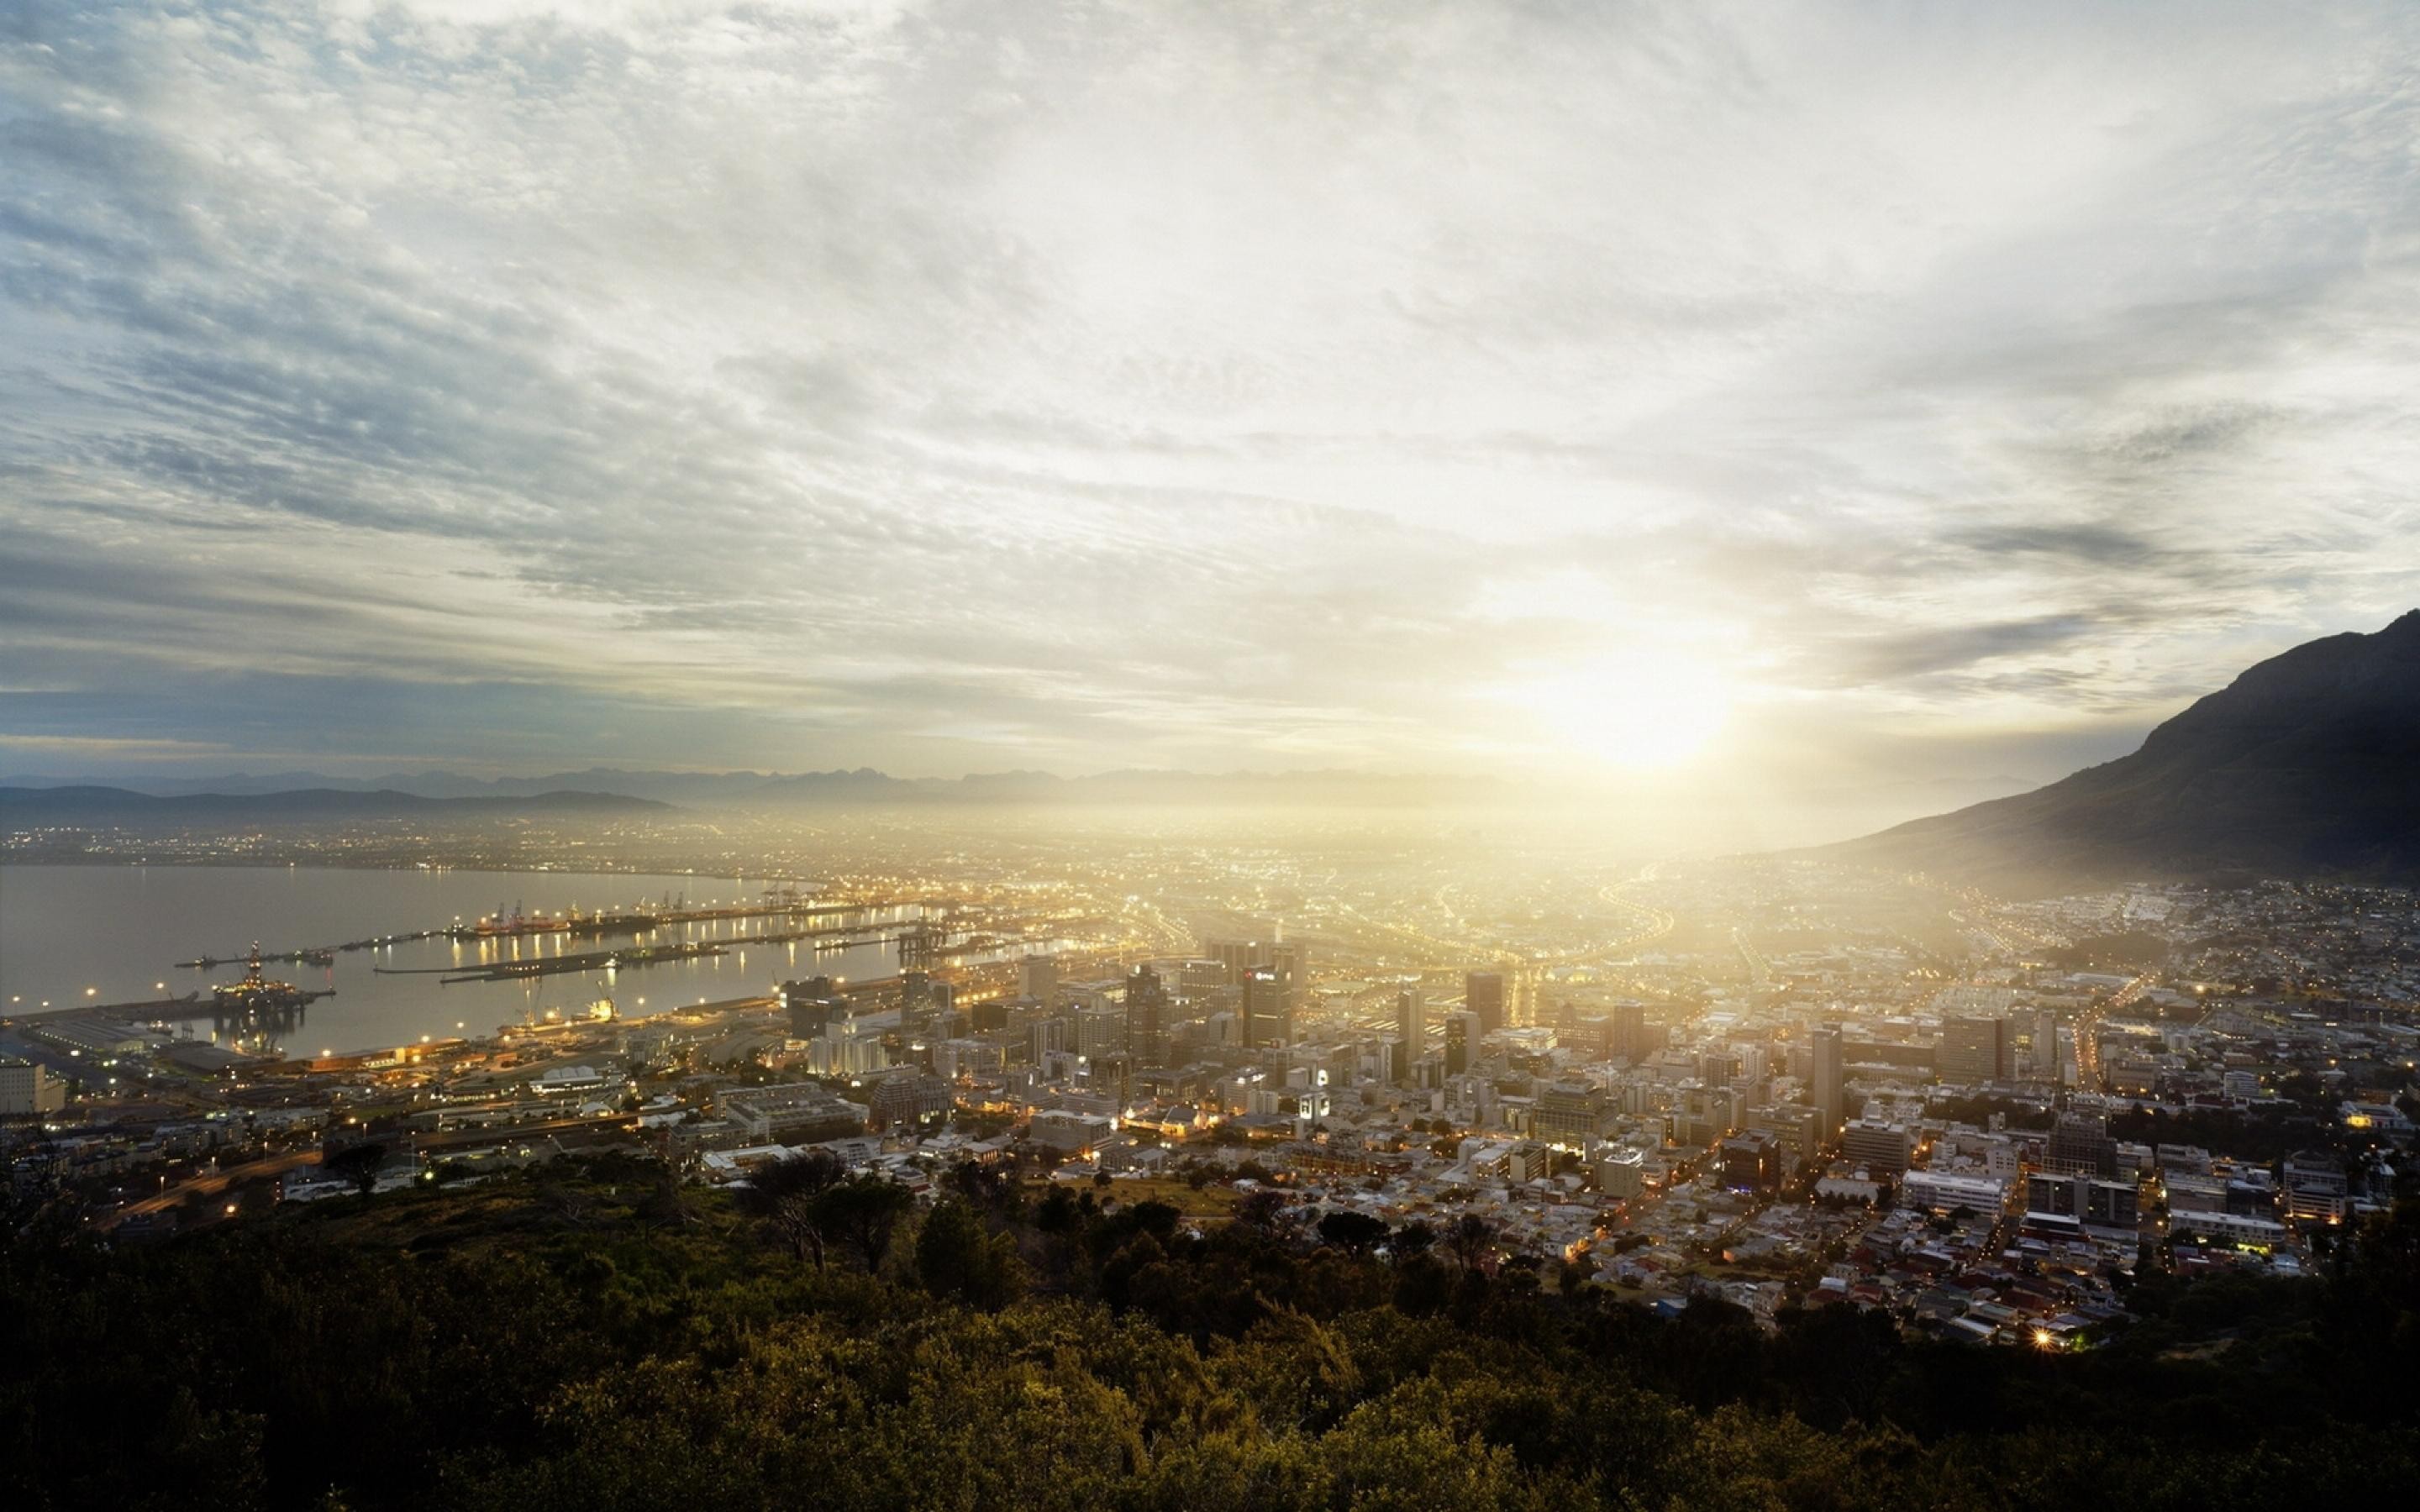 photography, Sunrise, Urban, Cityscape, Sun rays, Water, Sea, City, Cape Town, South Africa Wallpaper